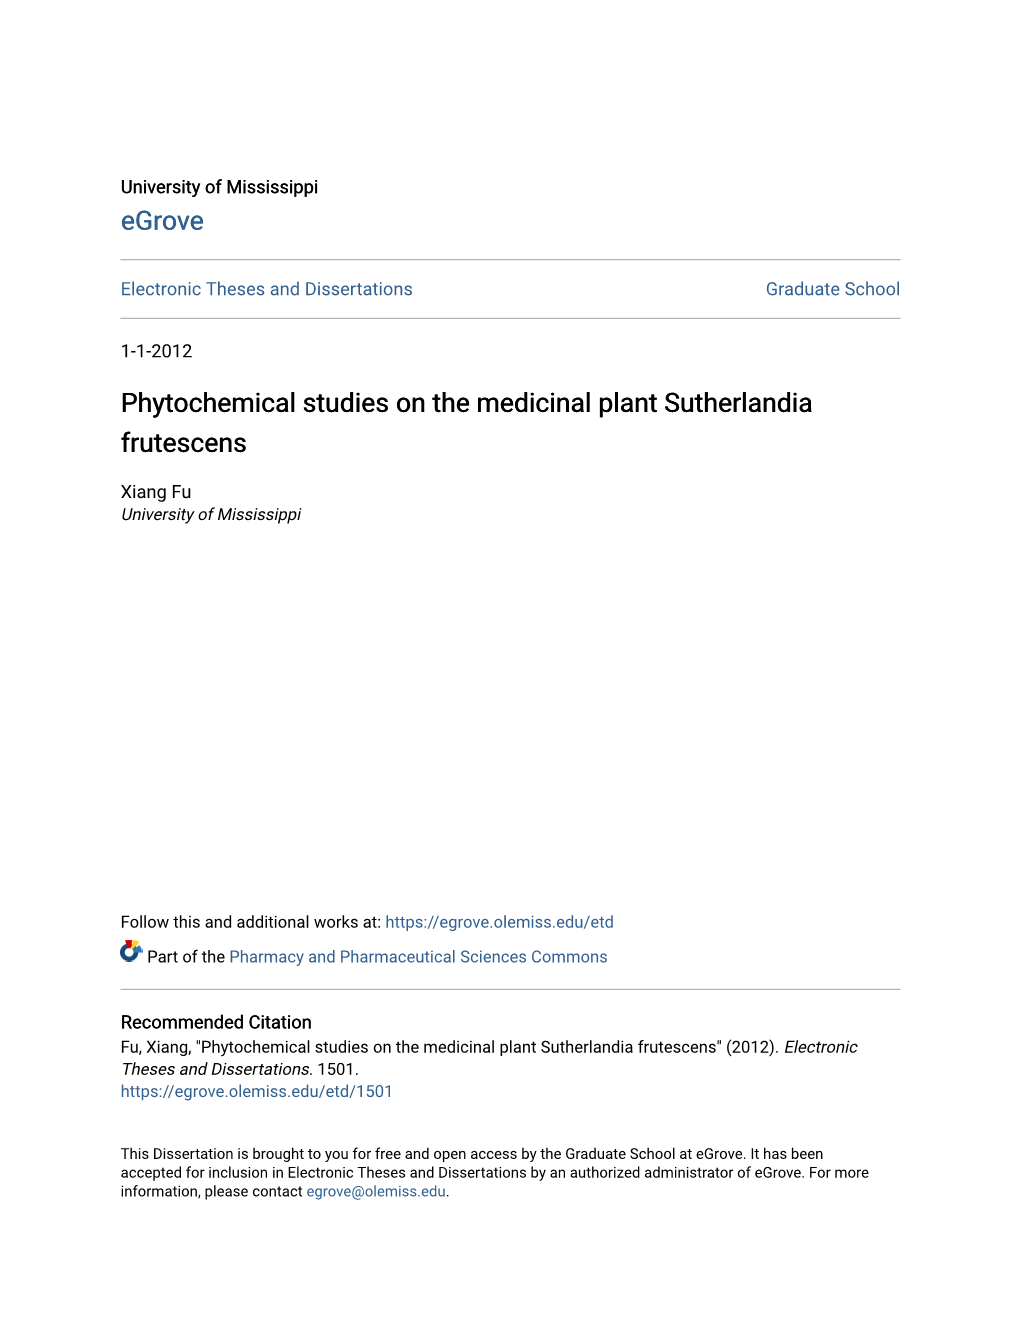 Phytochemical Studies on the Medicinal Plant Sutherlandia Frutescens